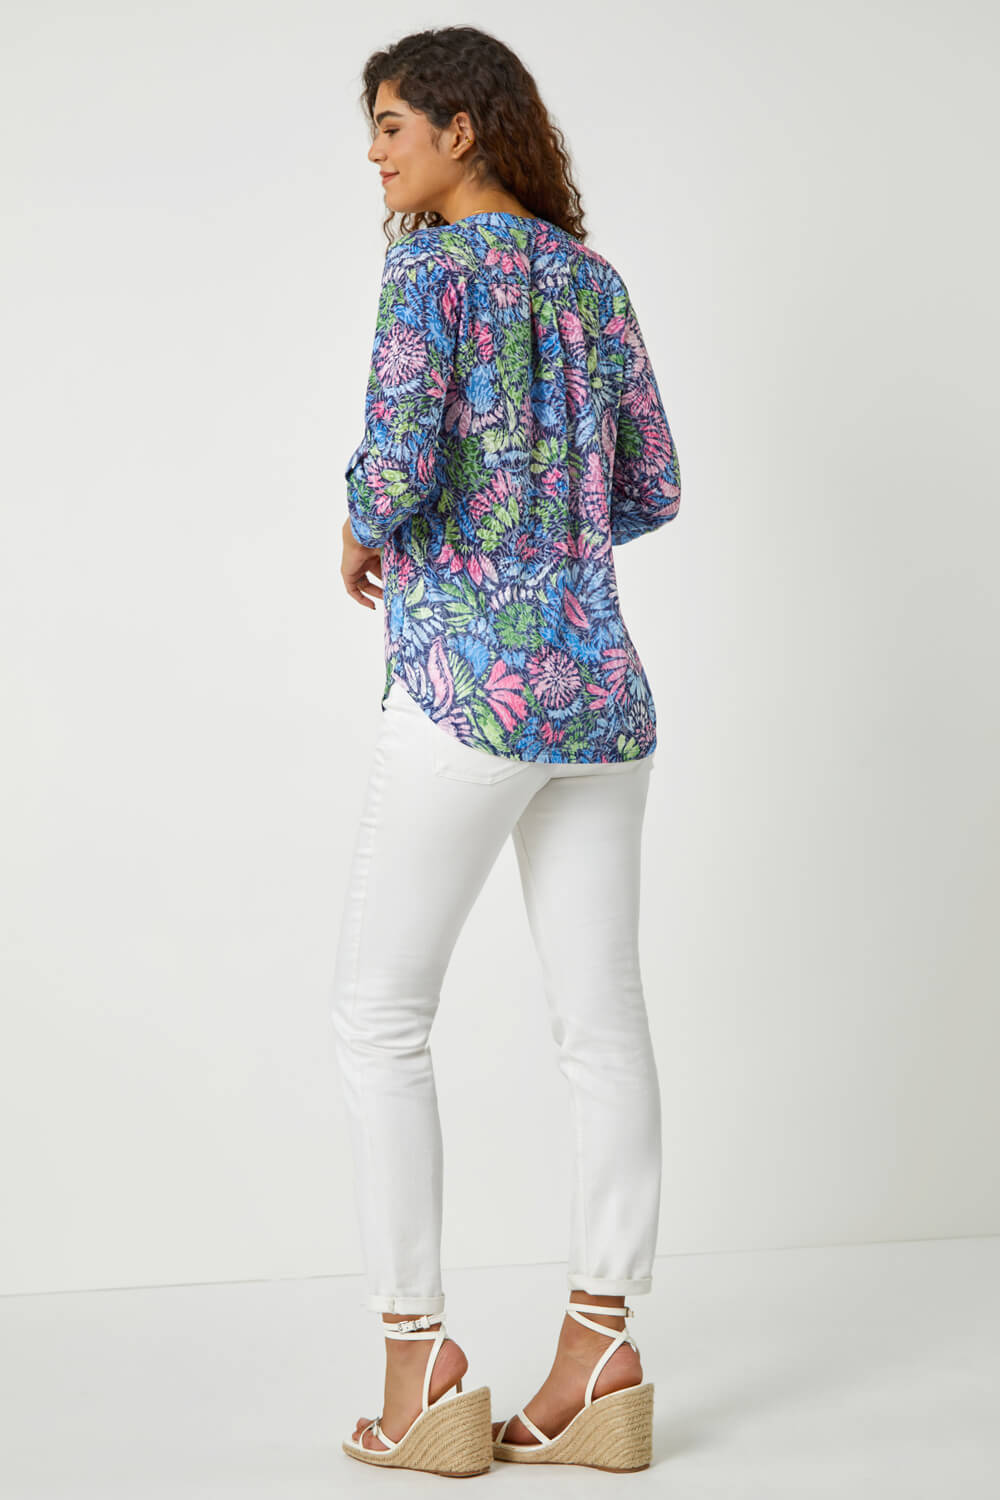 PINK Textured Floral Print Stretch Shirt, Image 3 of 5